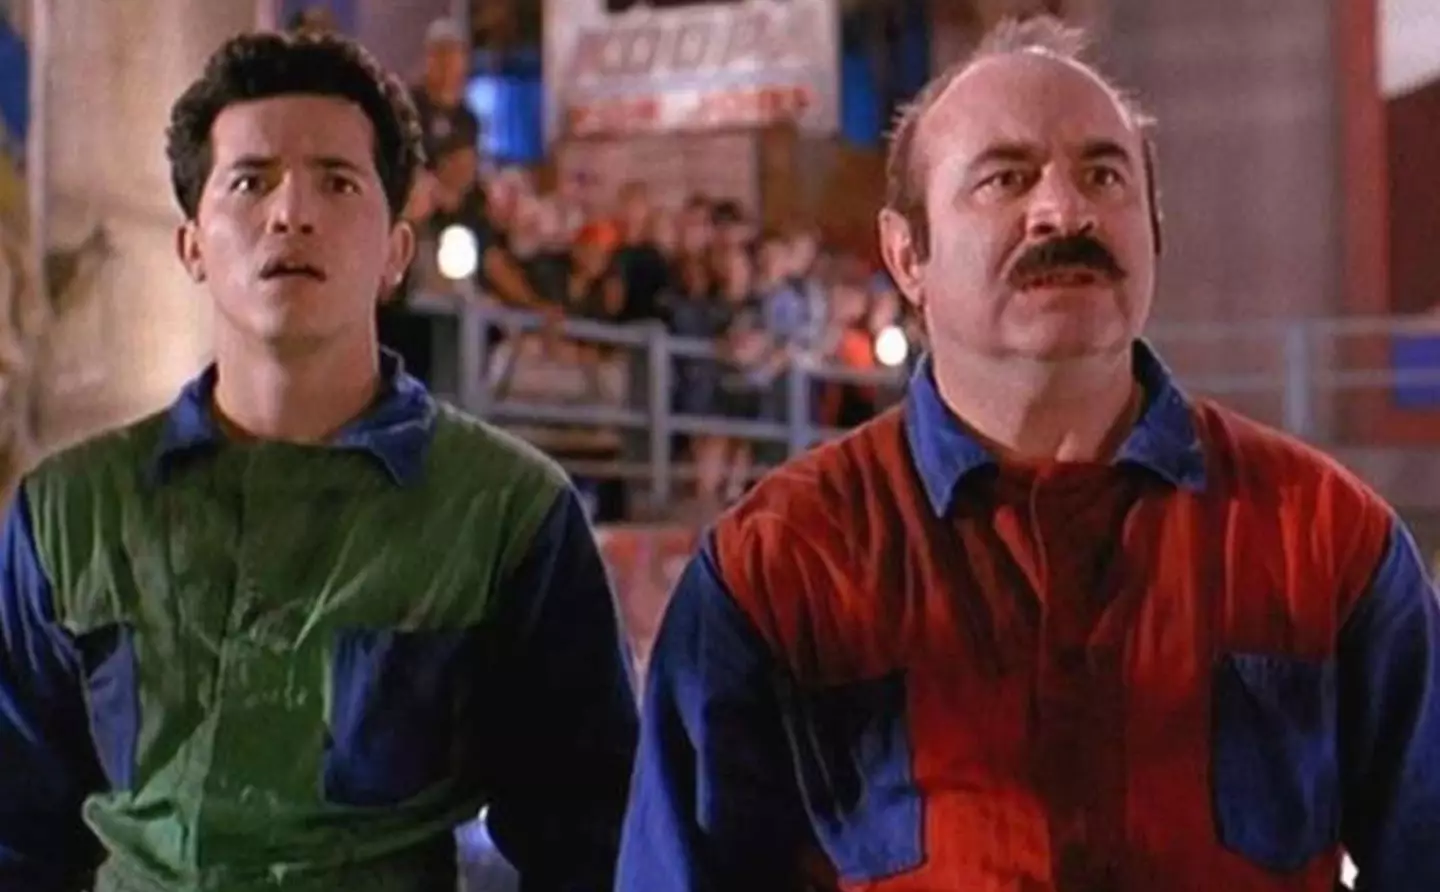 Seth Rogen says the OG Super Mario Bros. Movie is 'one of the worst movies ever made.